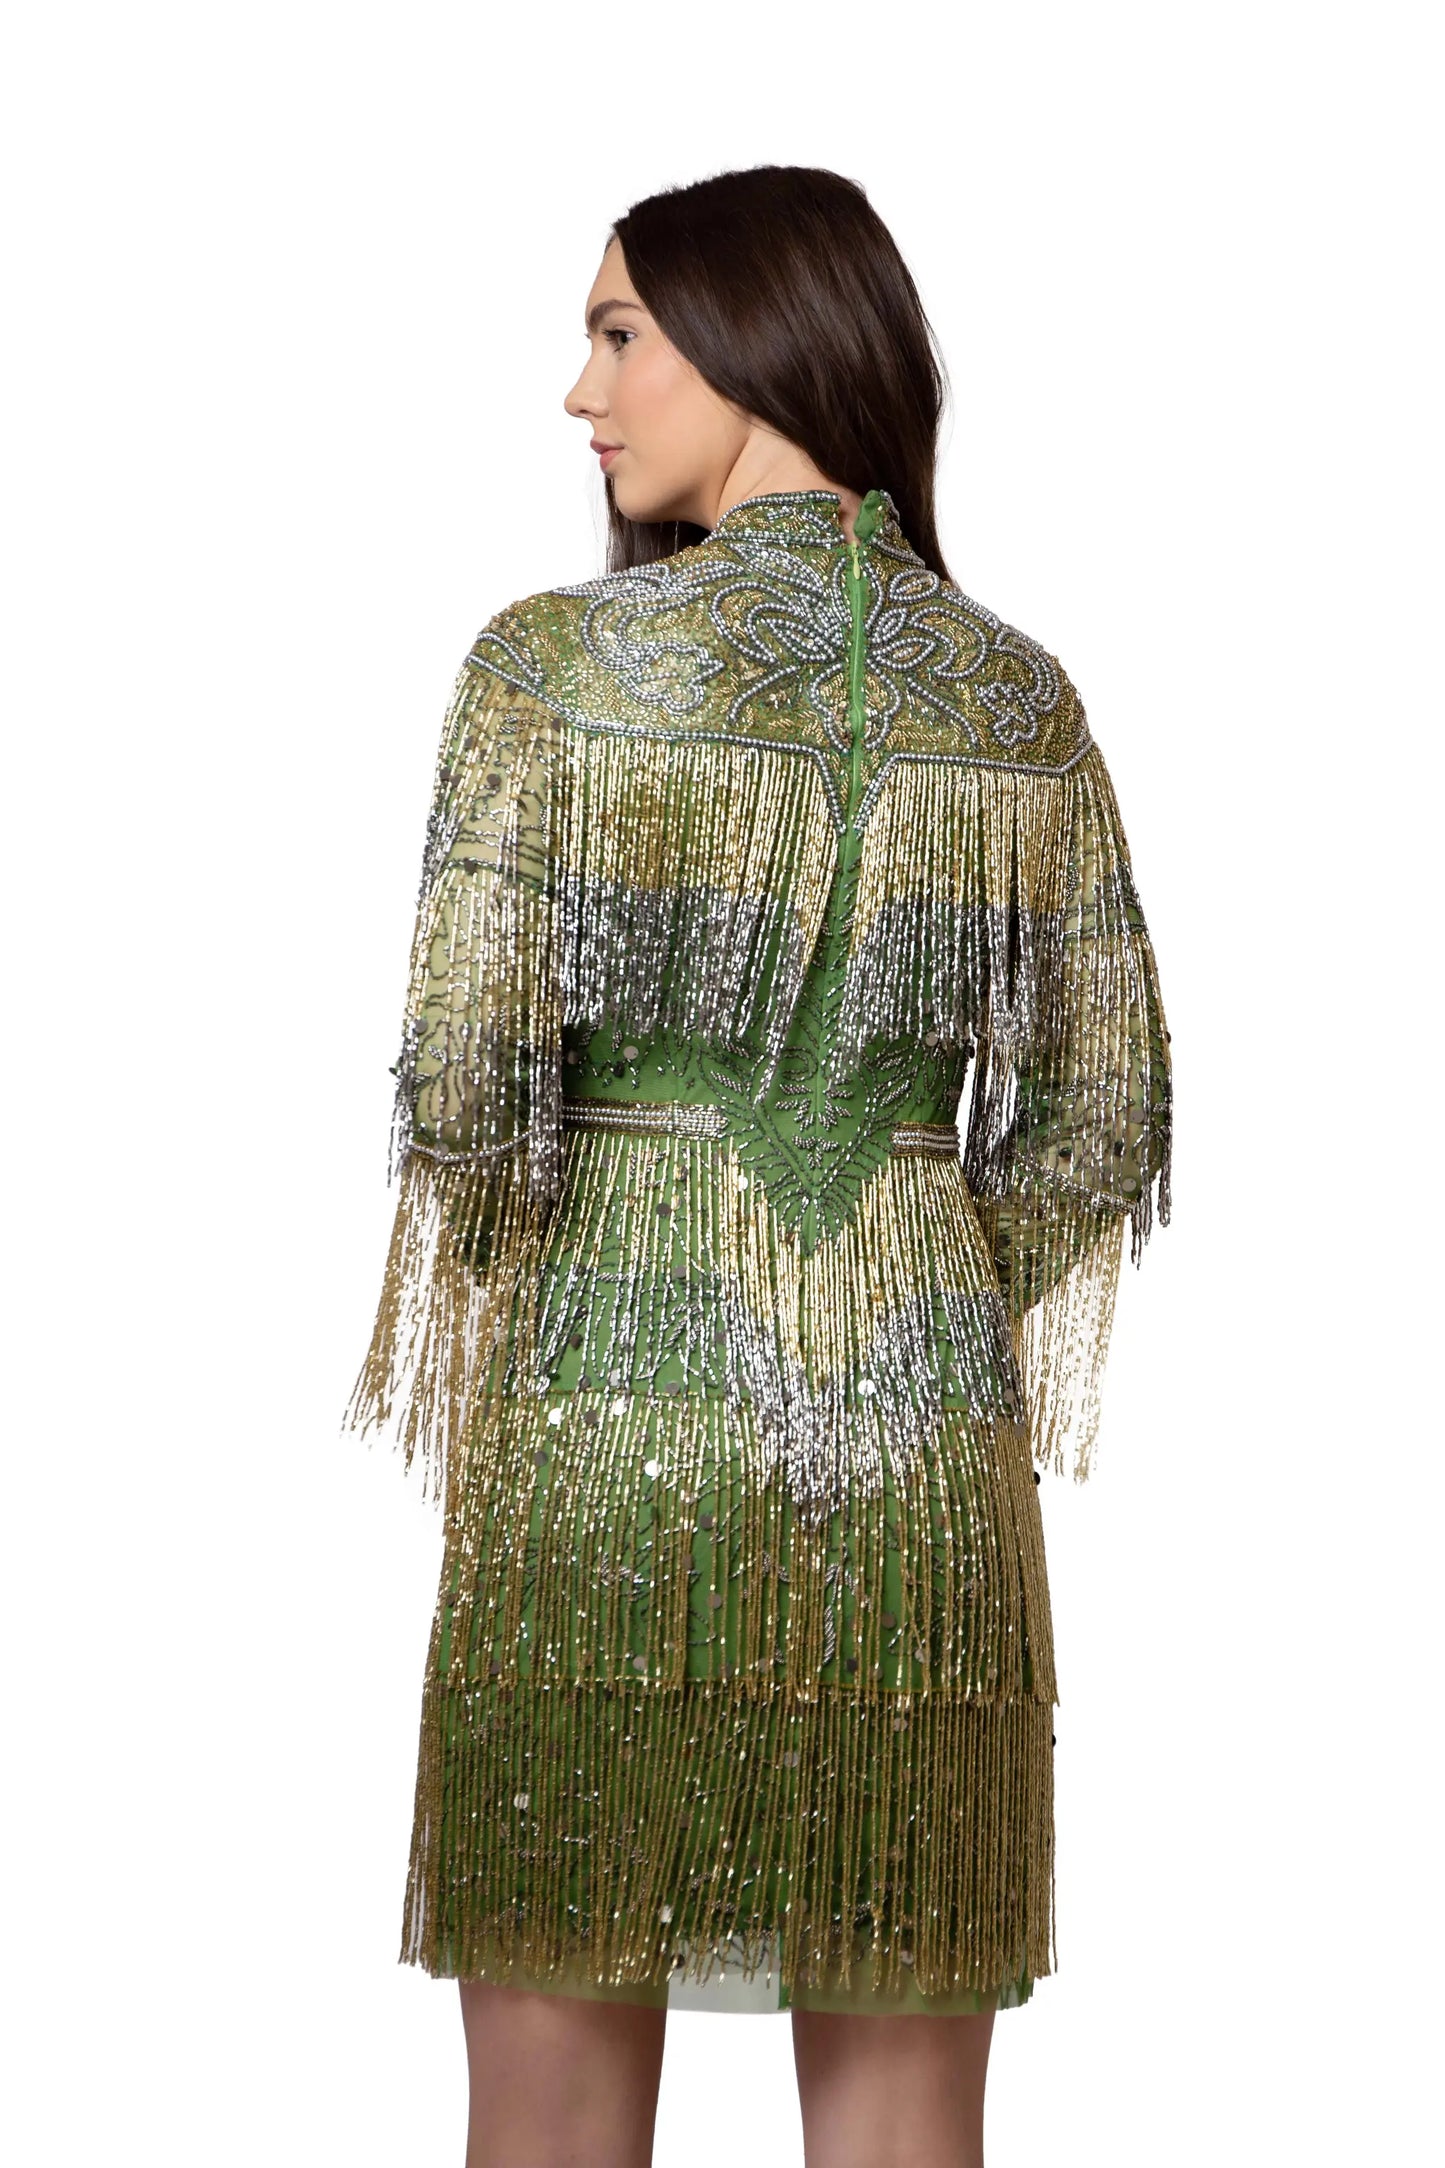 A green dress with gold accent, back view